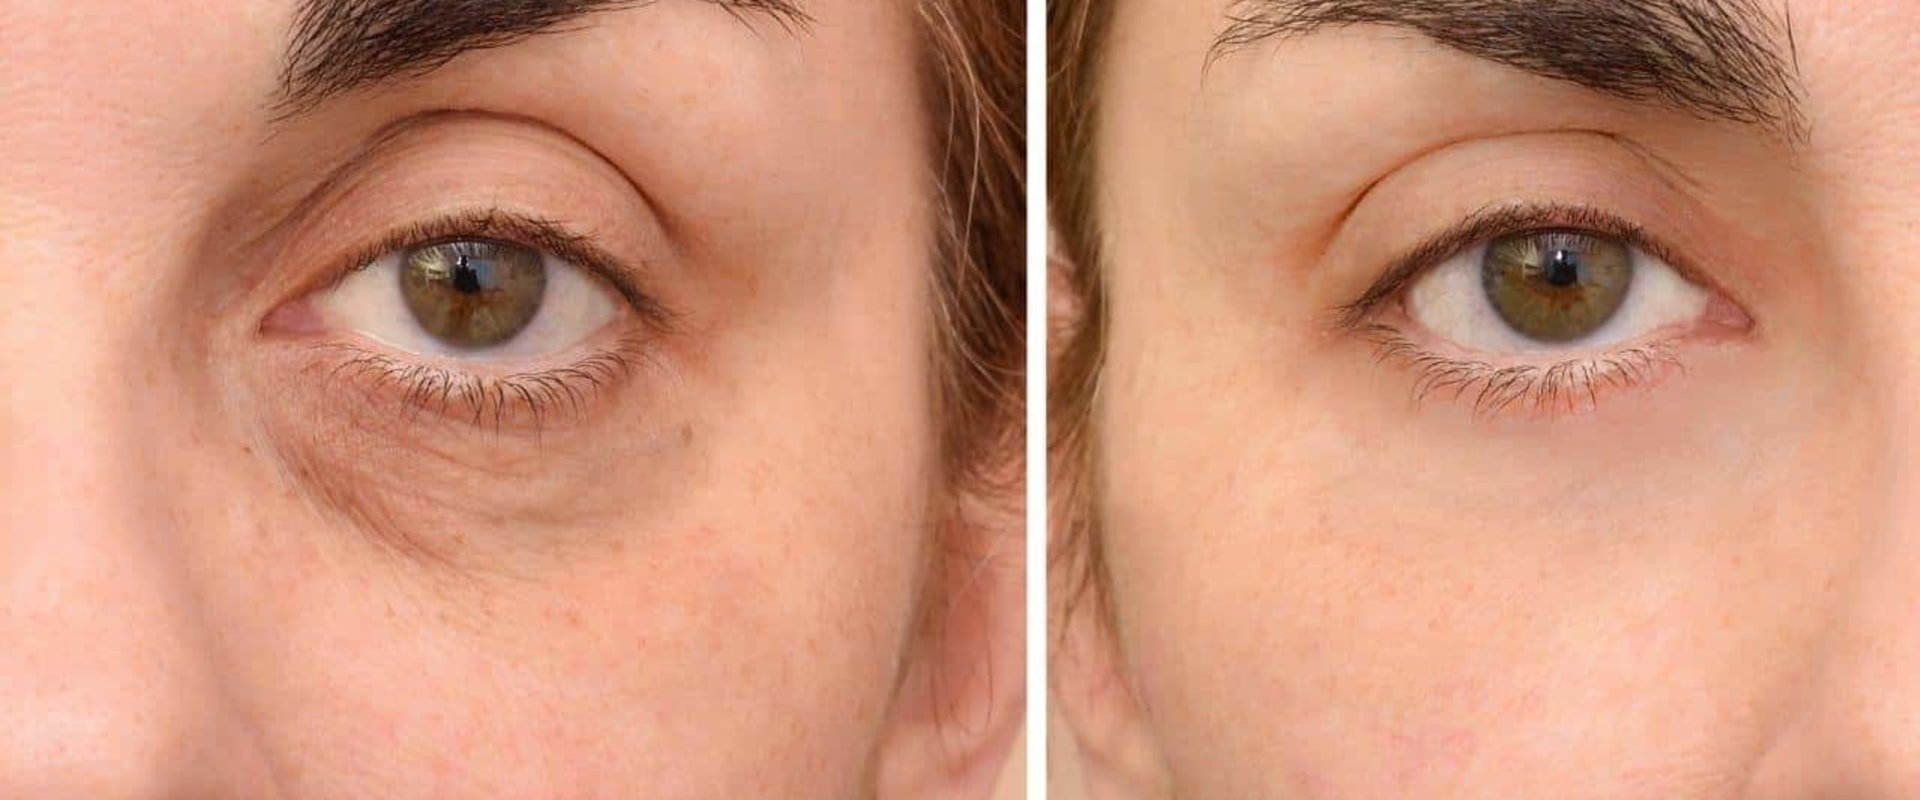 Injectable filler for Under eyes faq